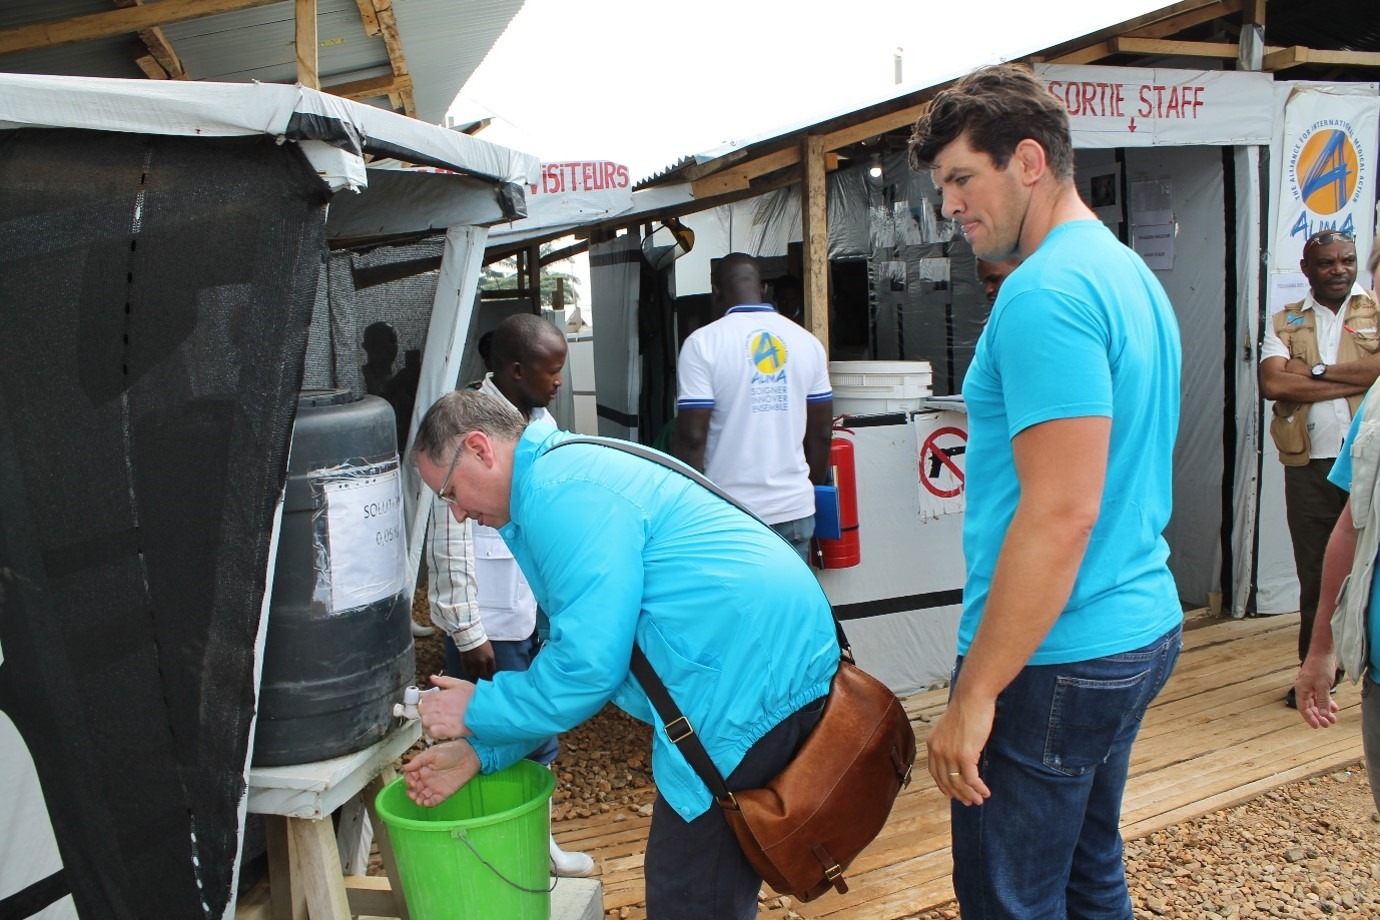 UNICEF Ambassador Donncha O'Callaghan and UNICEF's Gerard McDonnell visiting an Ebola Treatment Centre in the DRC